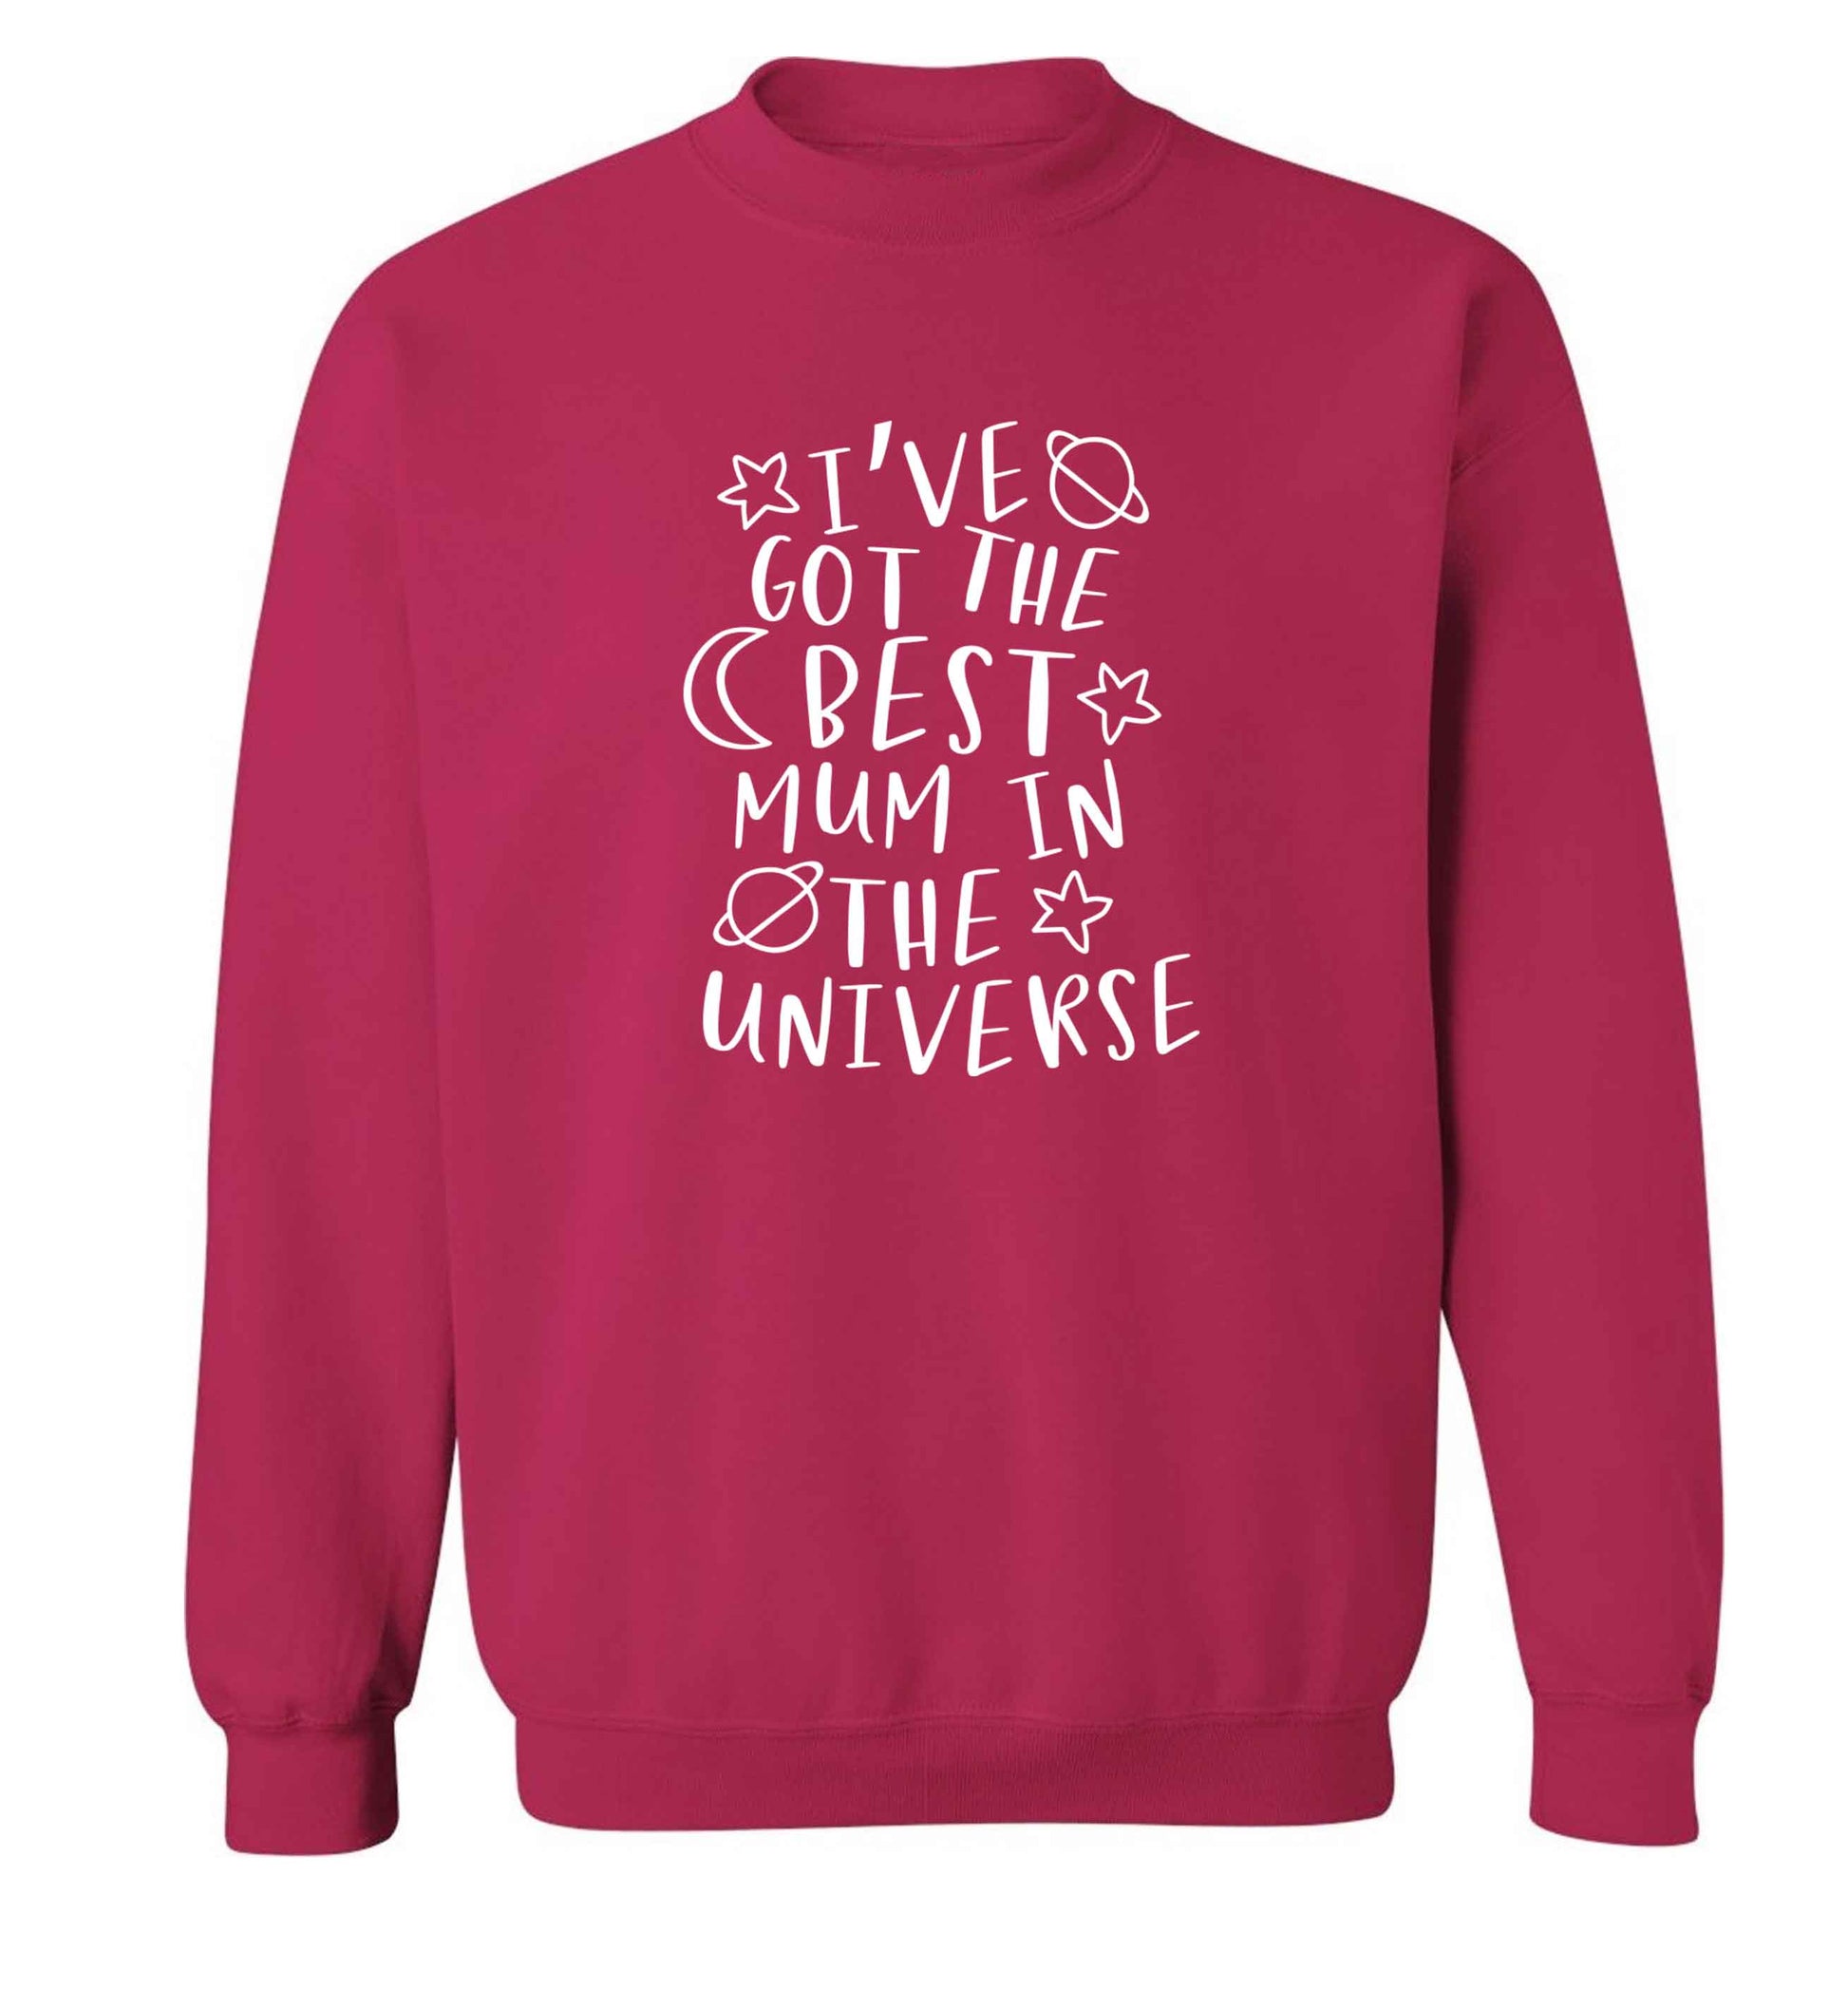 I've got the best mum in the universe adult's unisex pink sweater 2XL